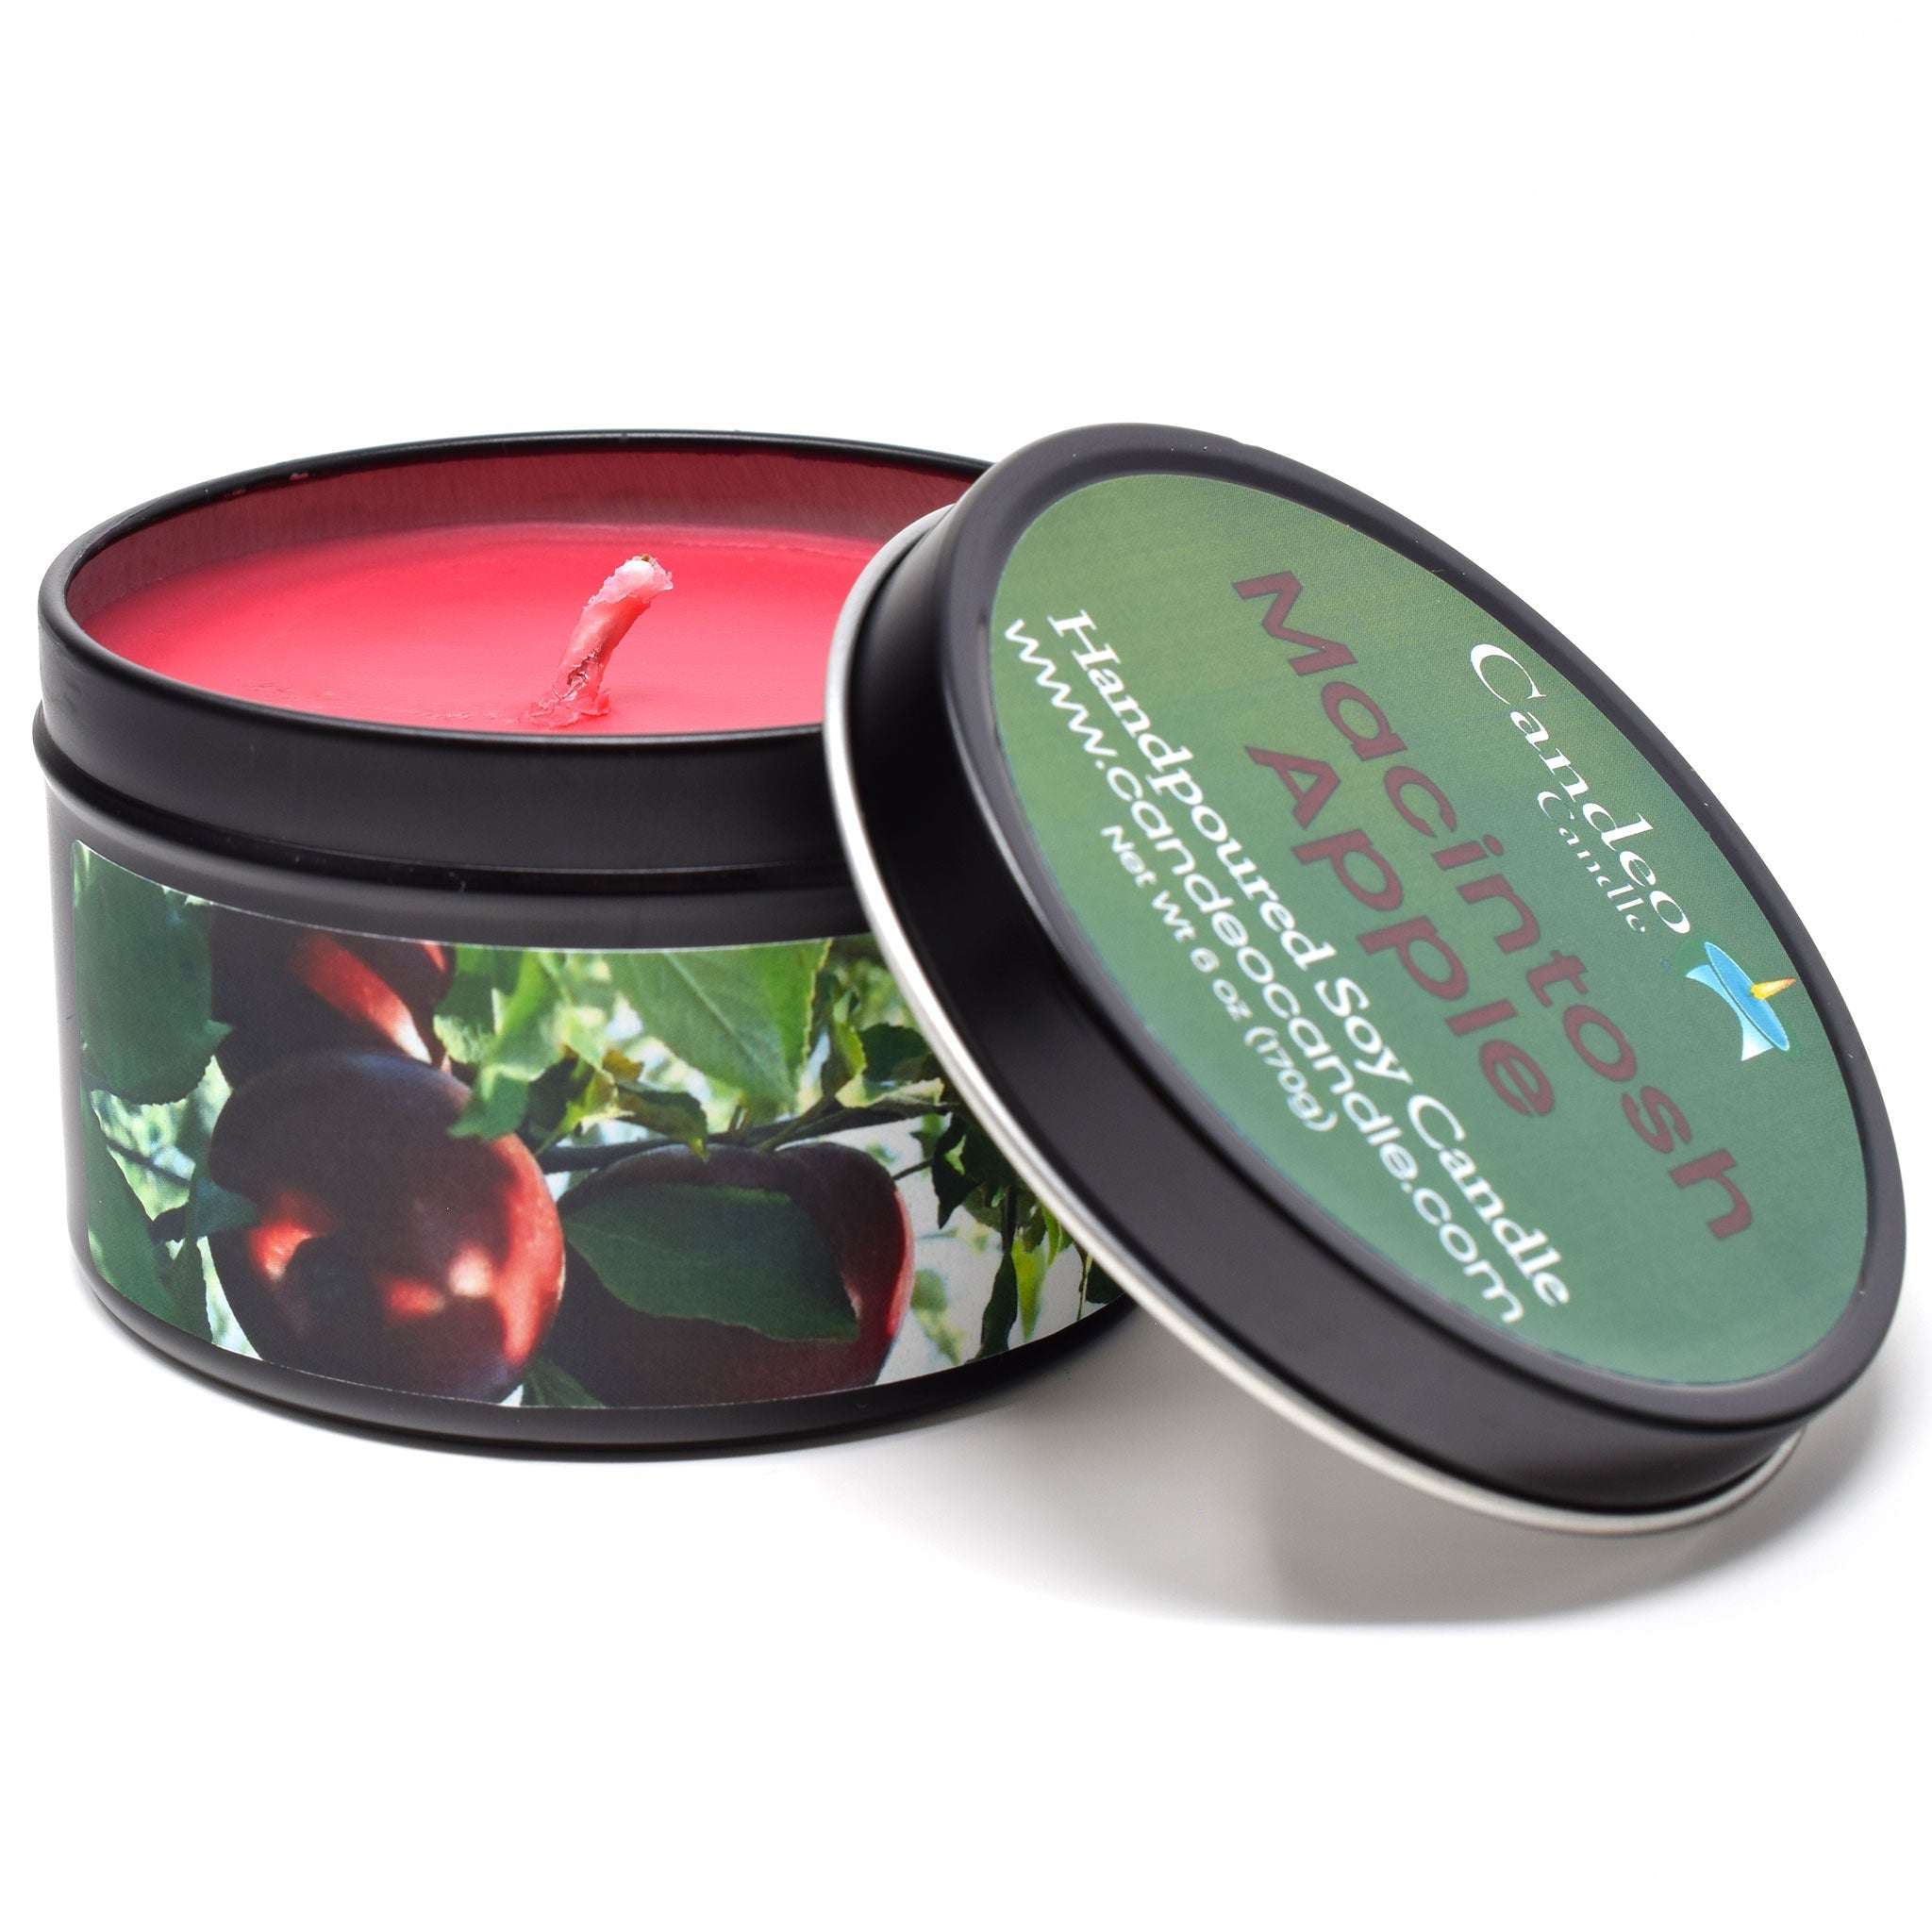 Macintosh Apple, 6oz Soy Candle Tin - Candeo Candle